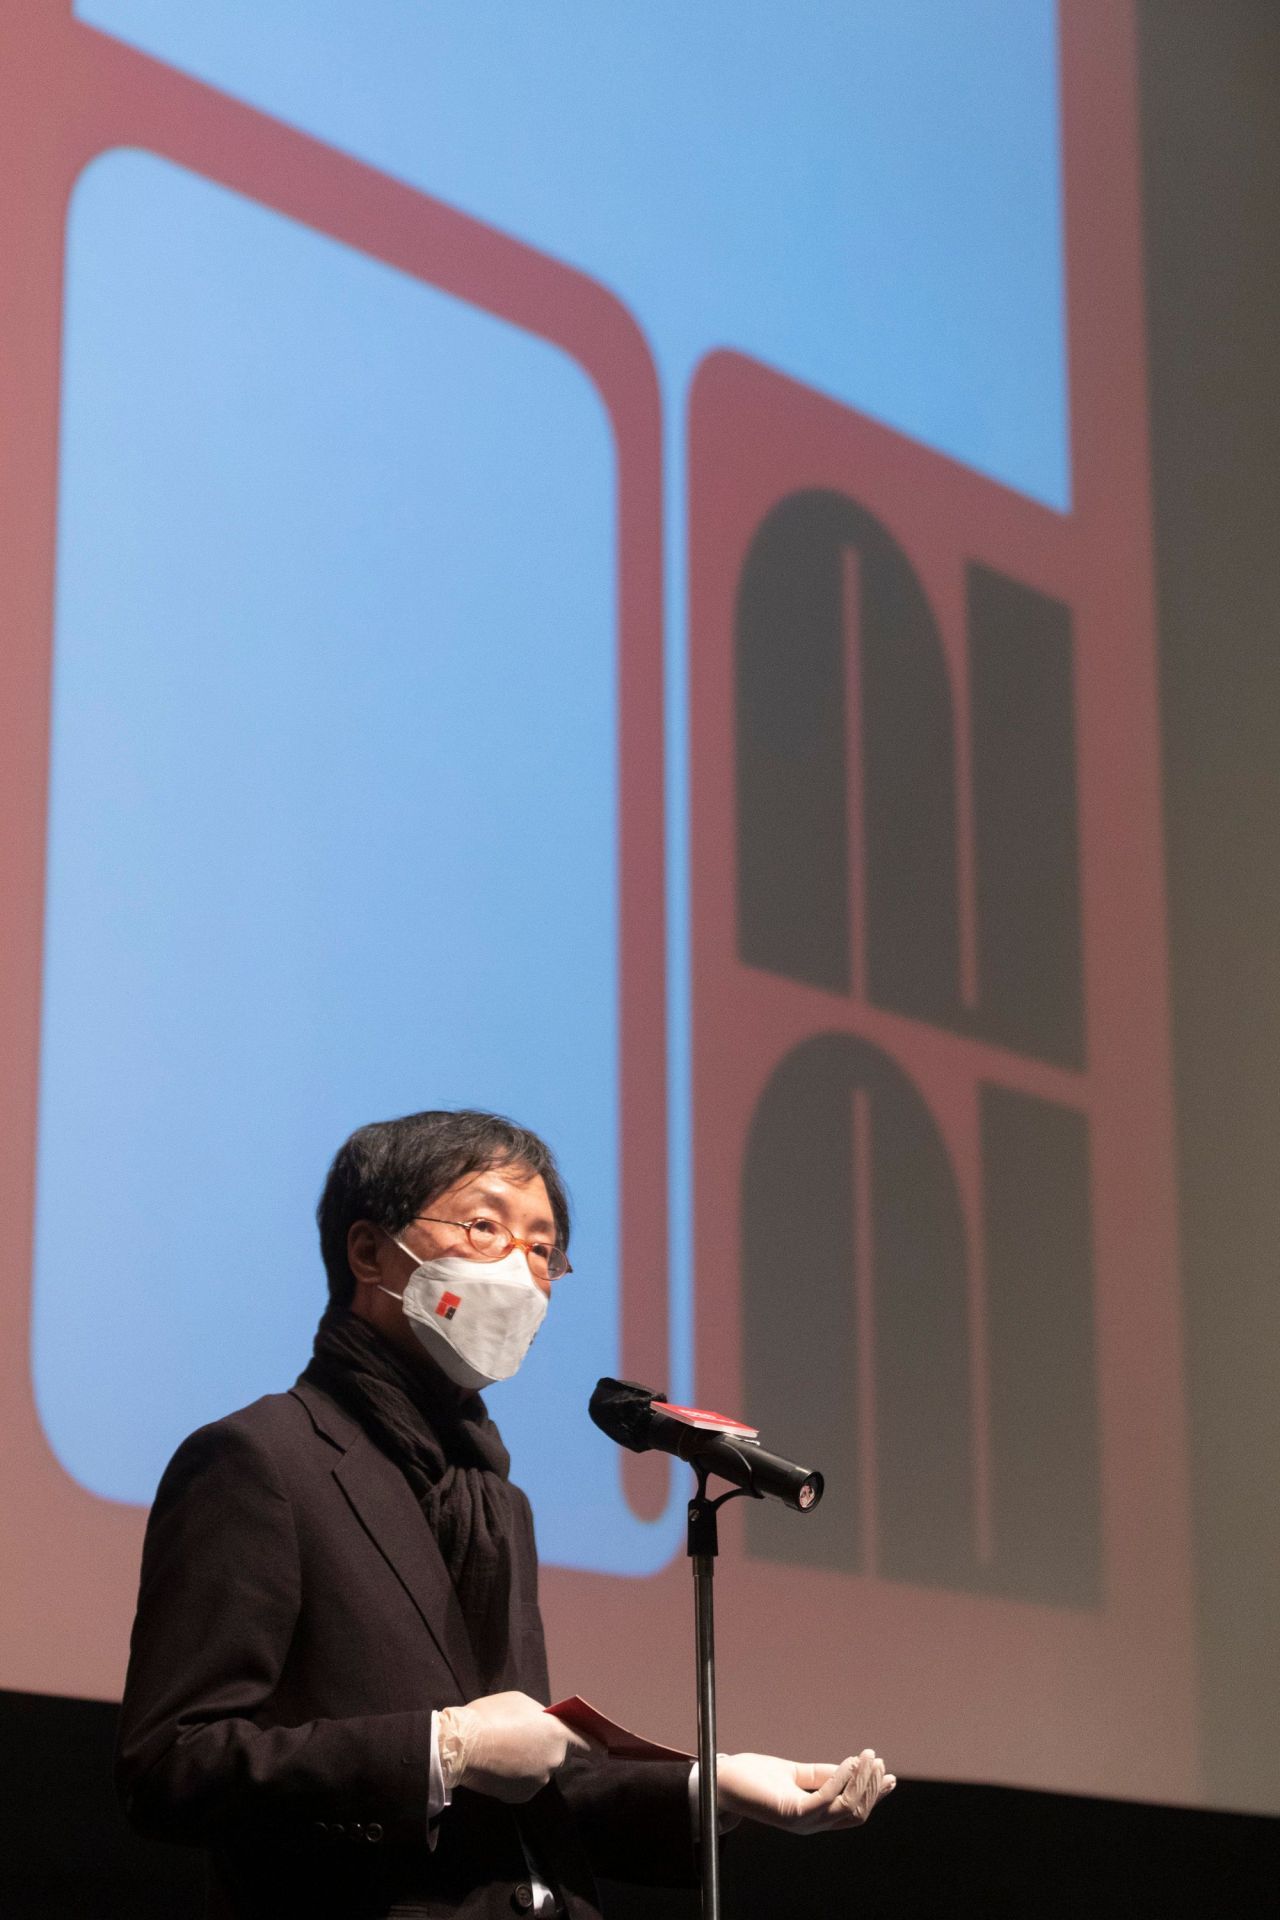 Director of the Jeonju International Film Festival Lee Joon-dong speaks during the closing ceremony of the last year‘s event. (Jeonju IFF)